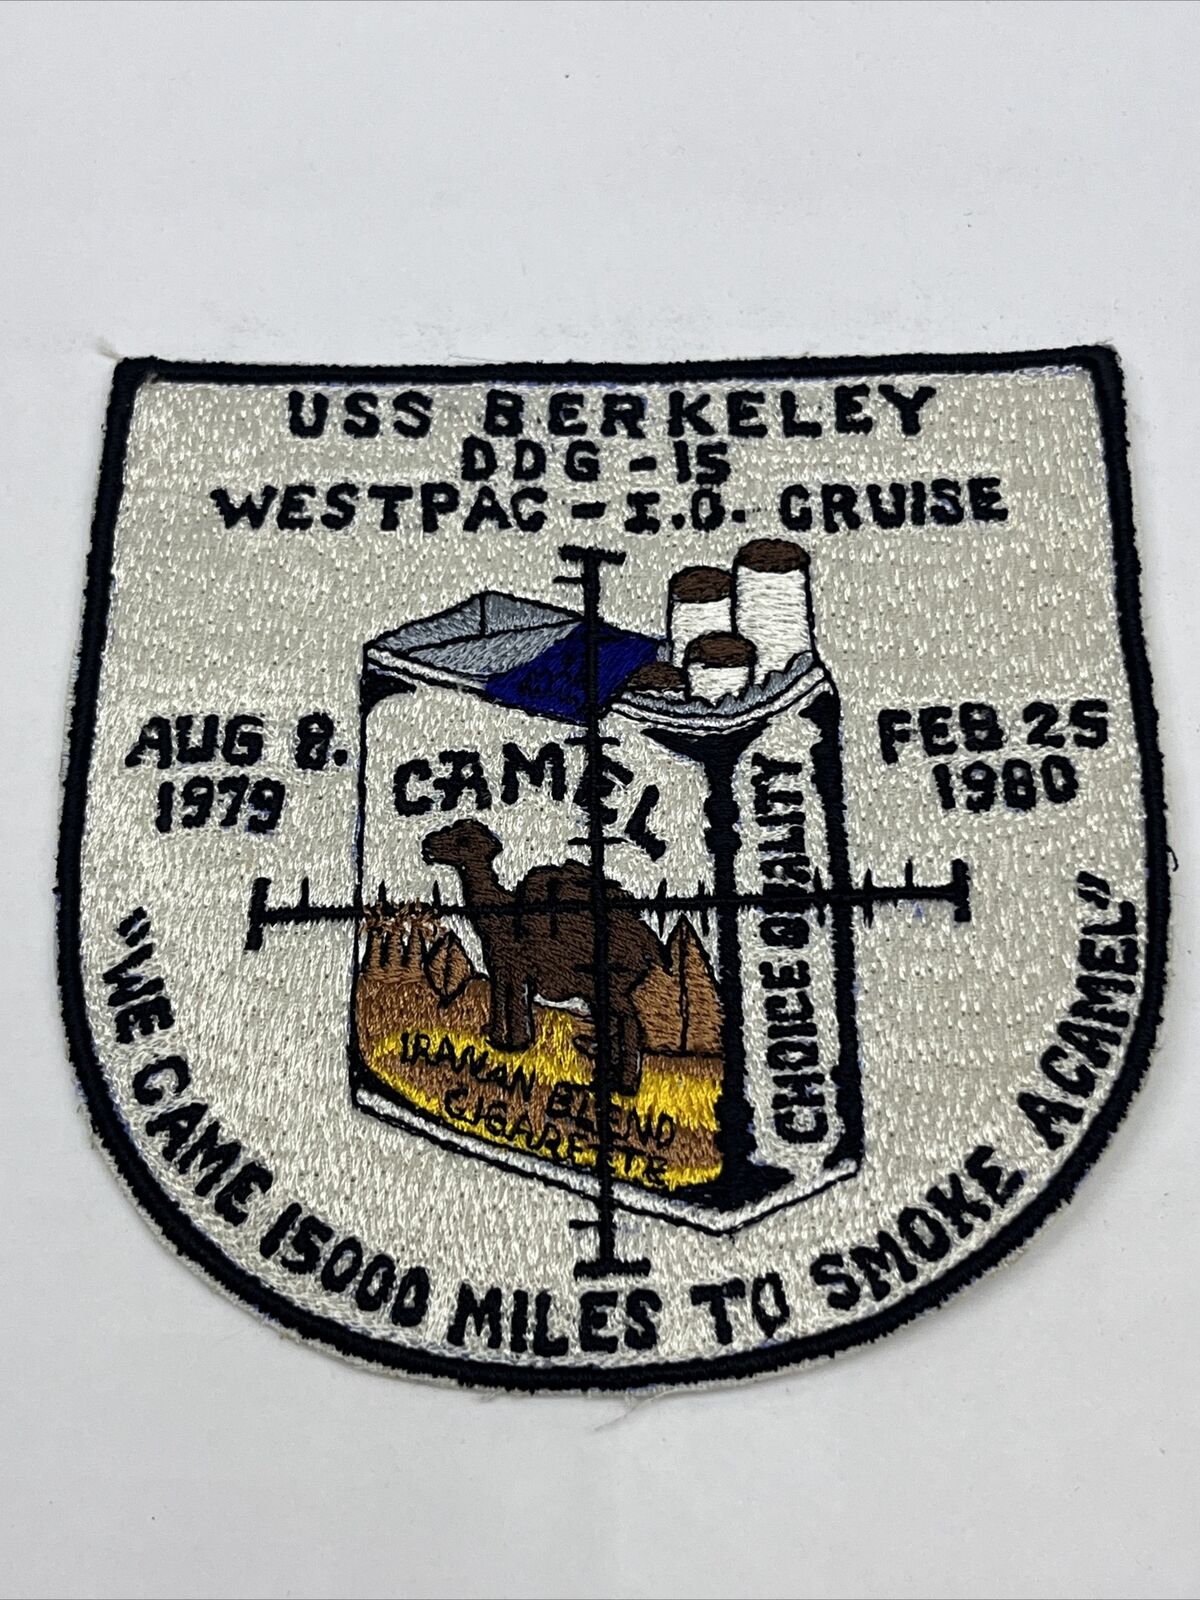 LARGE NAVY PATCH “We Came 15,000 Miles to Smoke a Camel” 1979 USS BERKELEY NOS